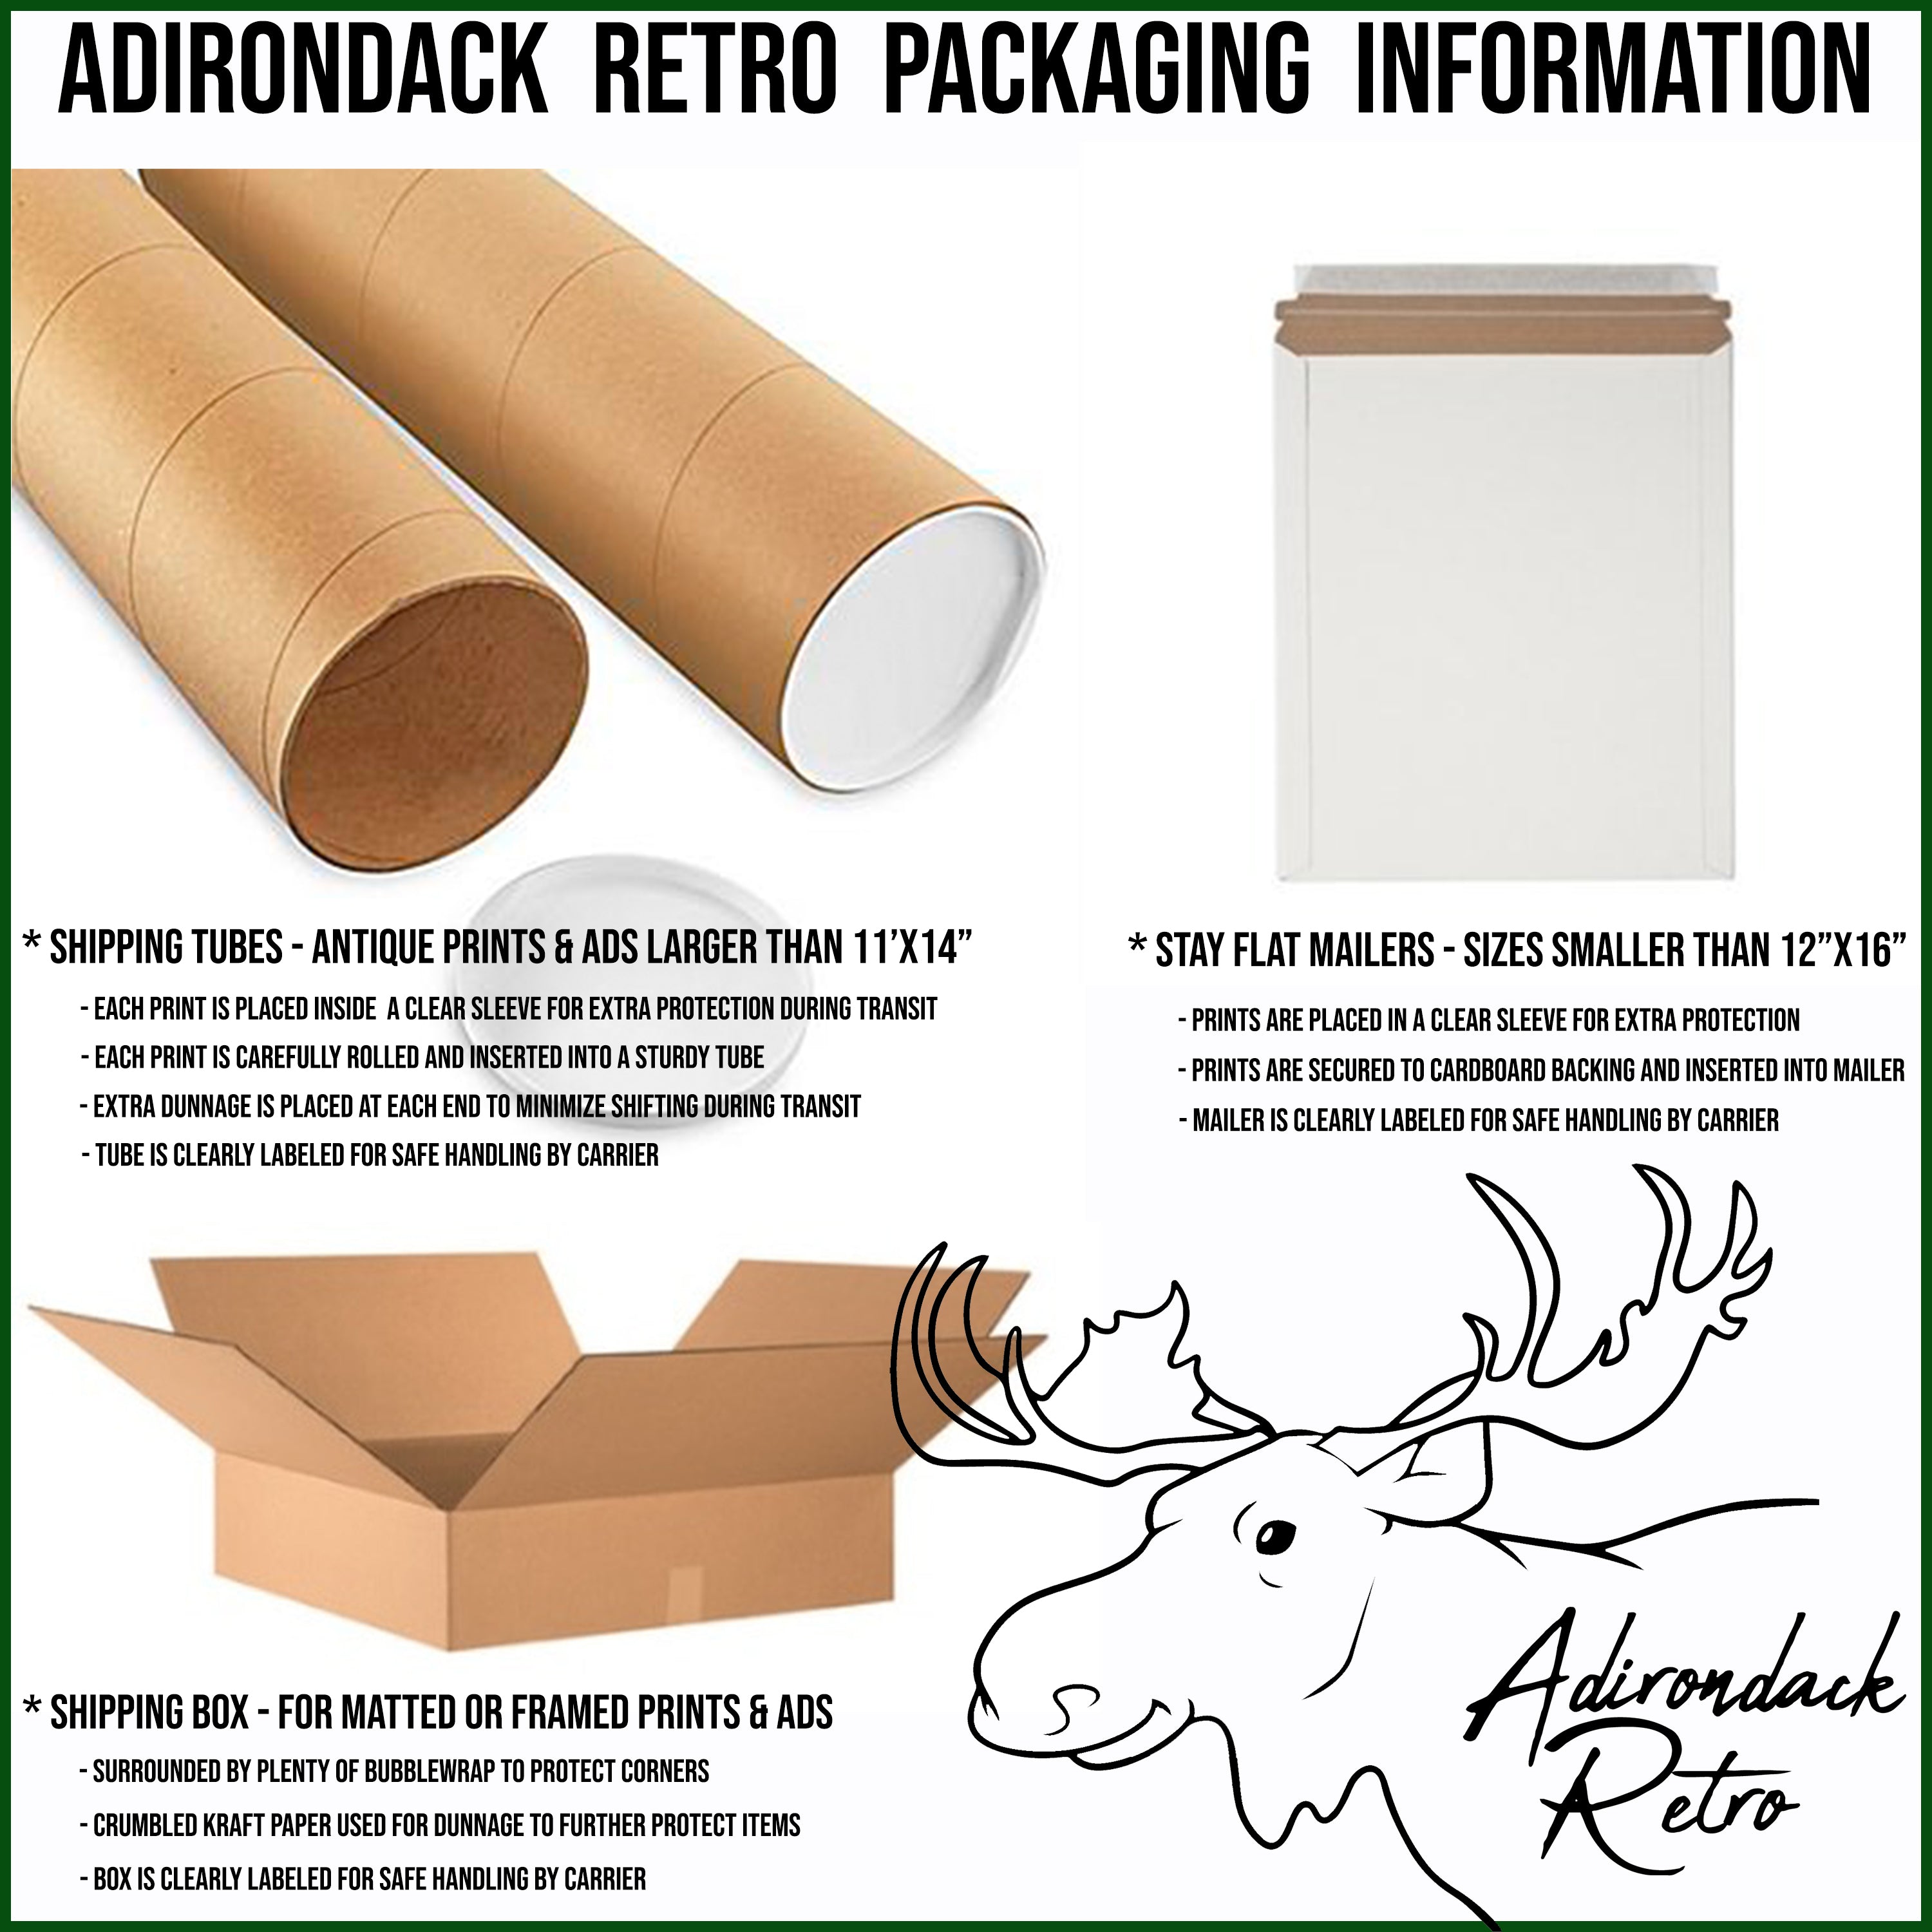 a cardboard package with a moose head on it